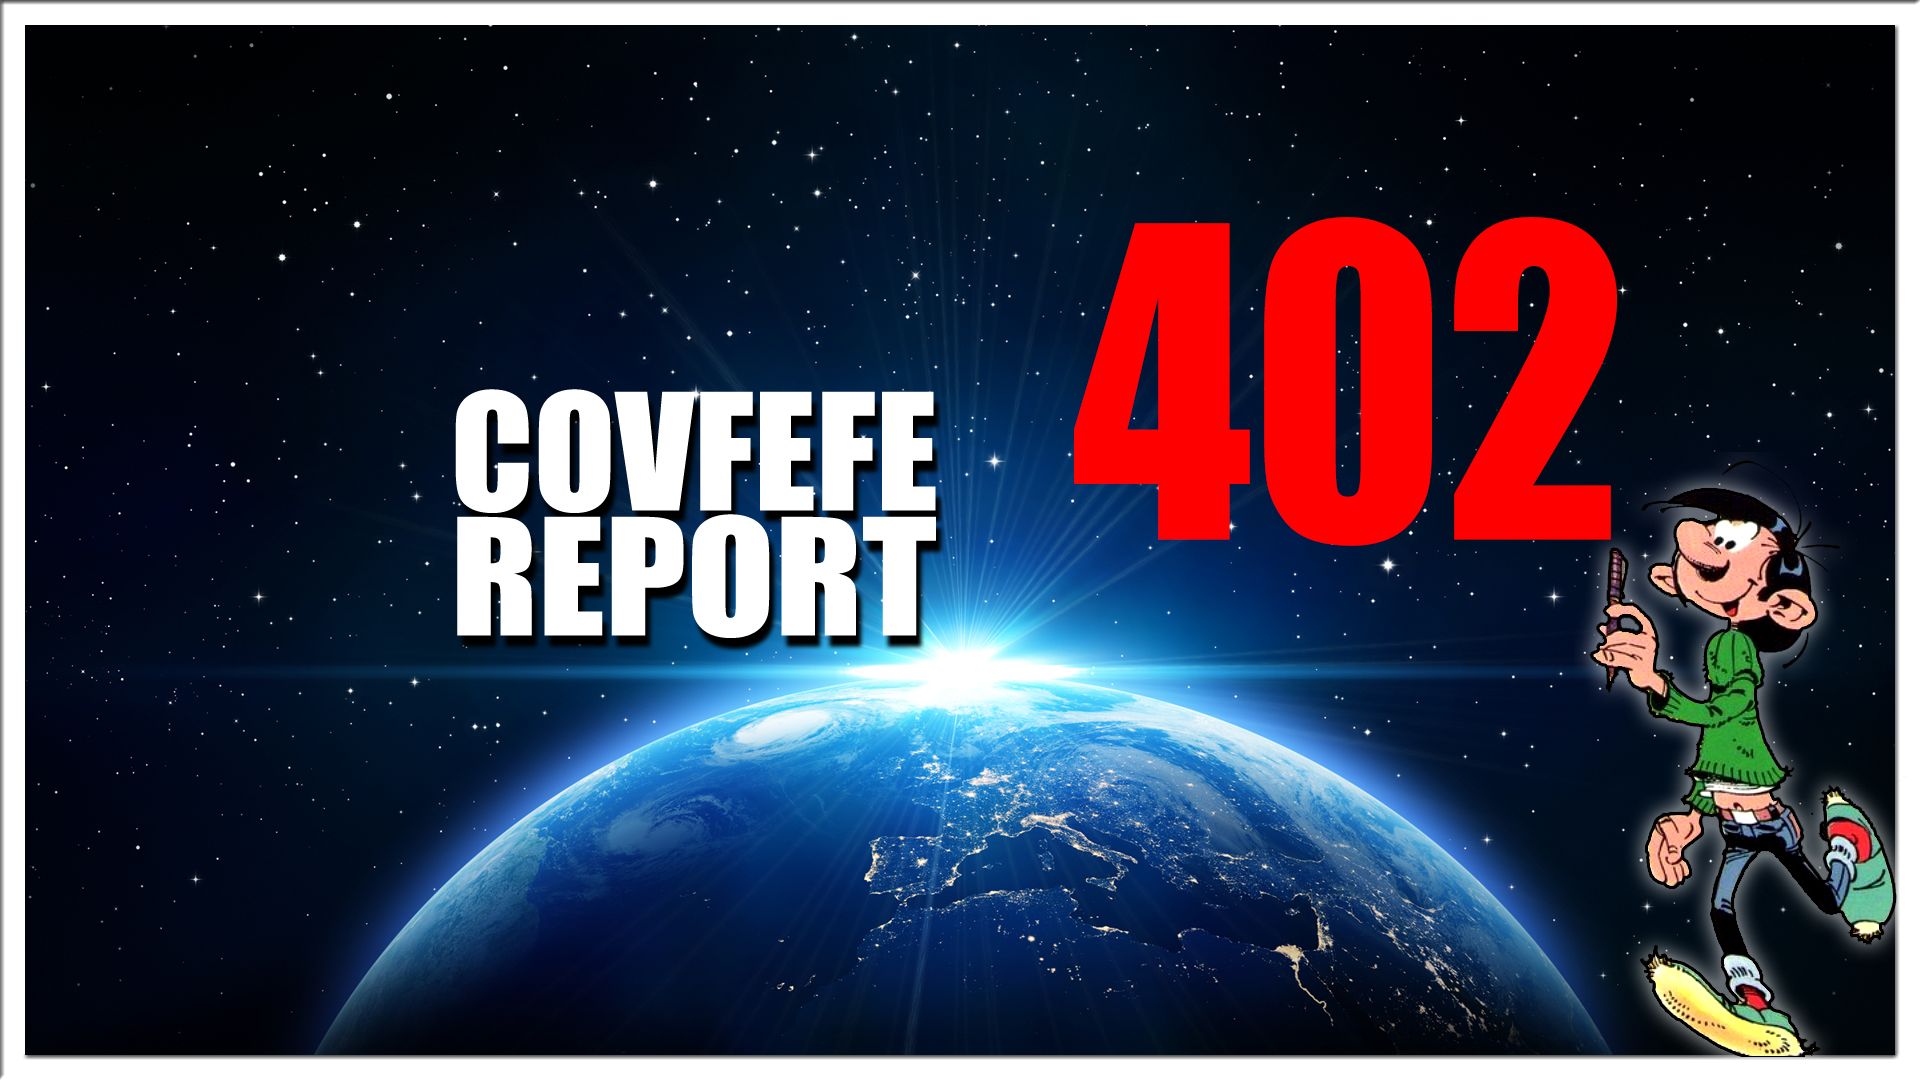 Covfefe Report 402. Donald J Trump State of the Union, Gedecodeerd